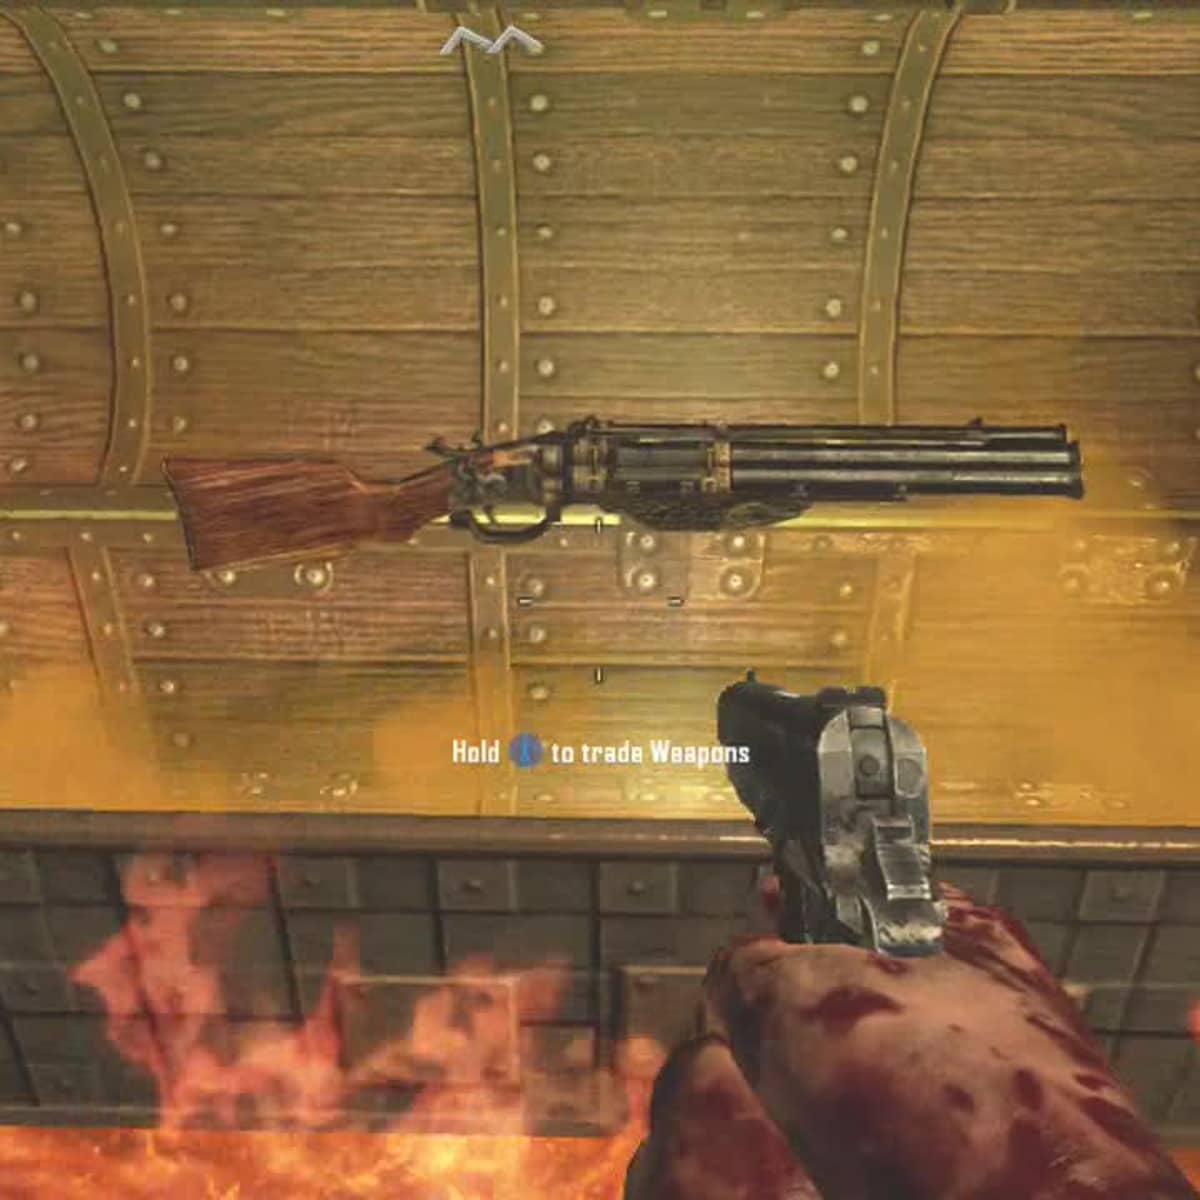 The Blundergat: Alcatraz, MOTD Wonder Weapon - Call of Duty, Black Ops 2,  Zombies - HubPages